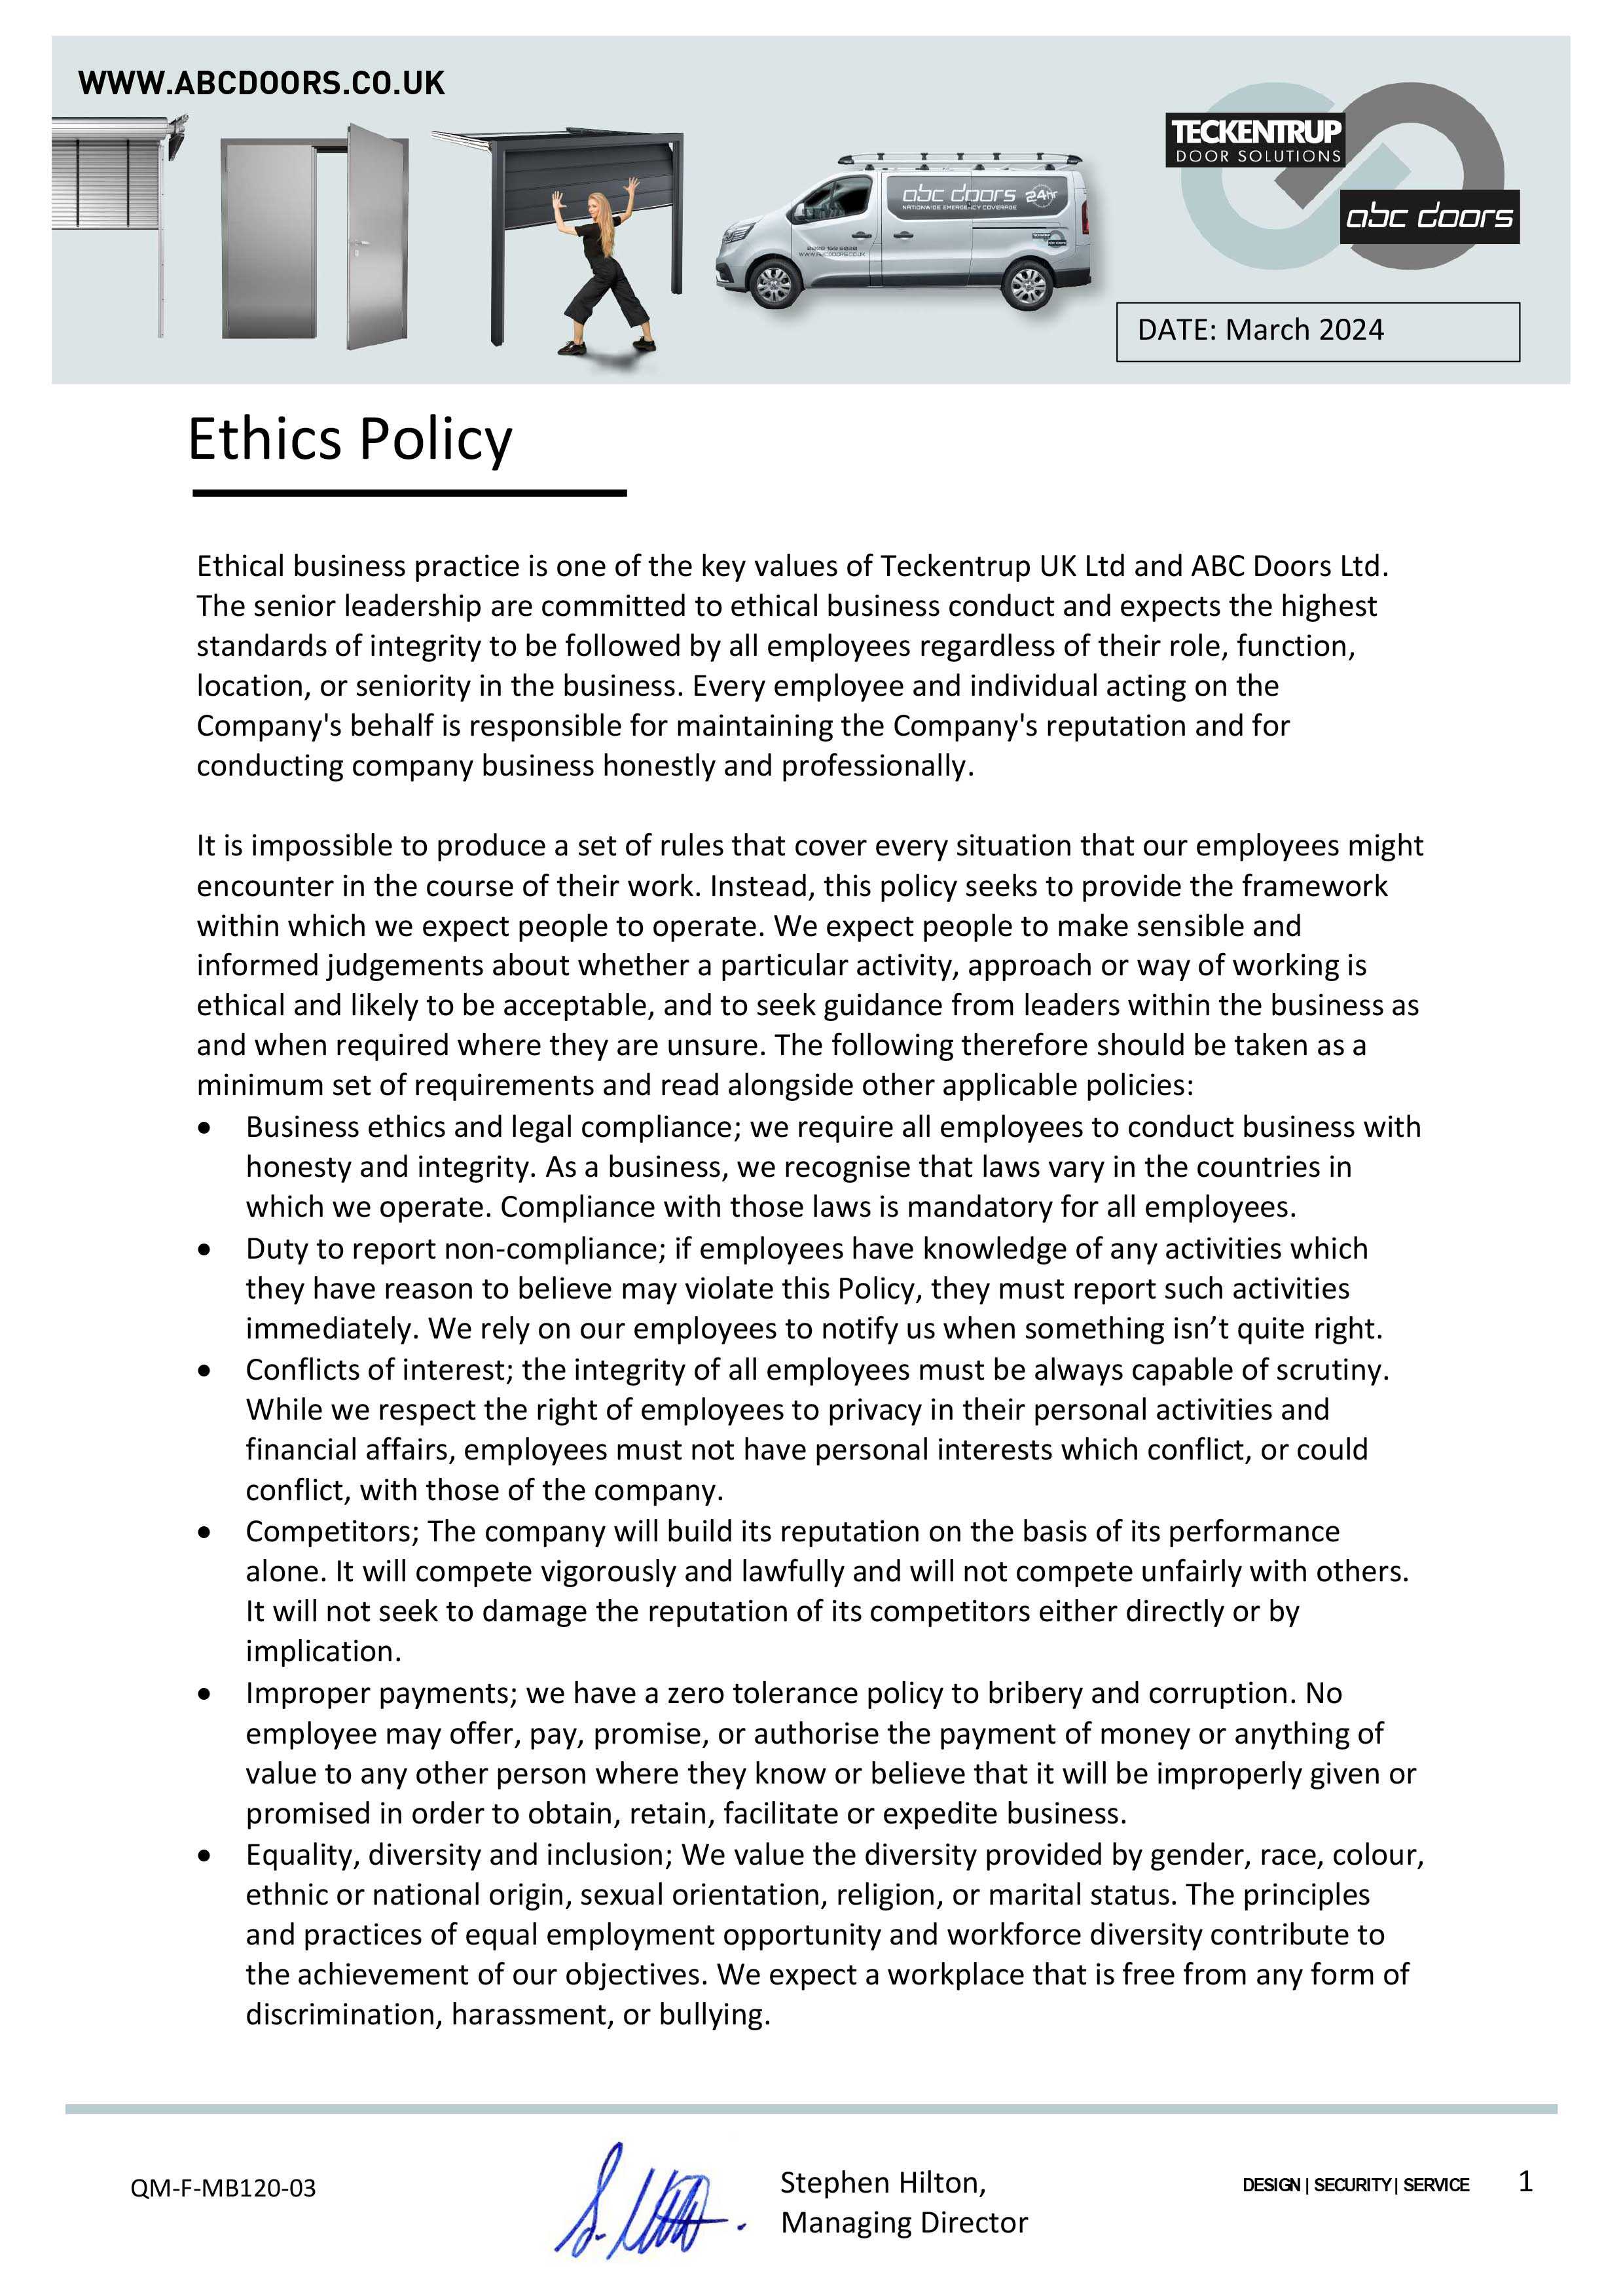 QM-F-MB120-03 Ethics Policy cover